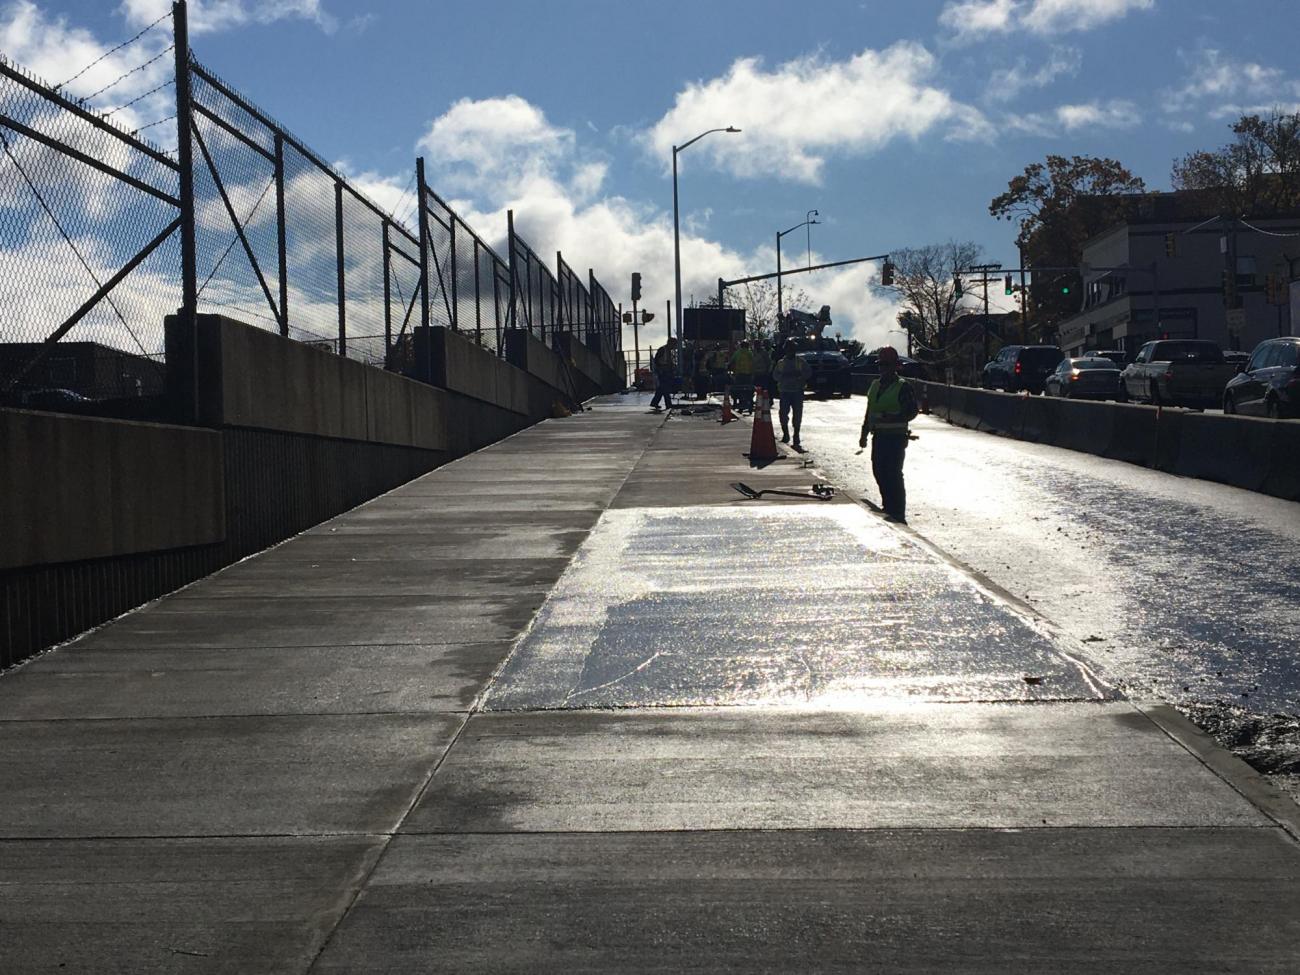 The new sidewalk at Wollaston Station along Newport Ave looking southbound (October 2019)